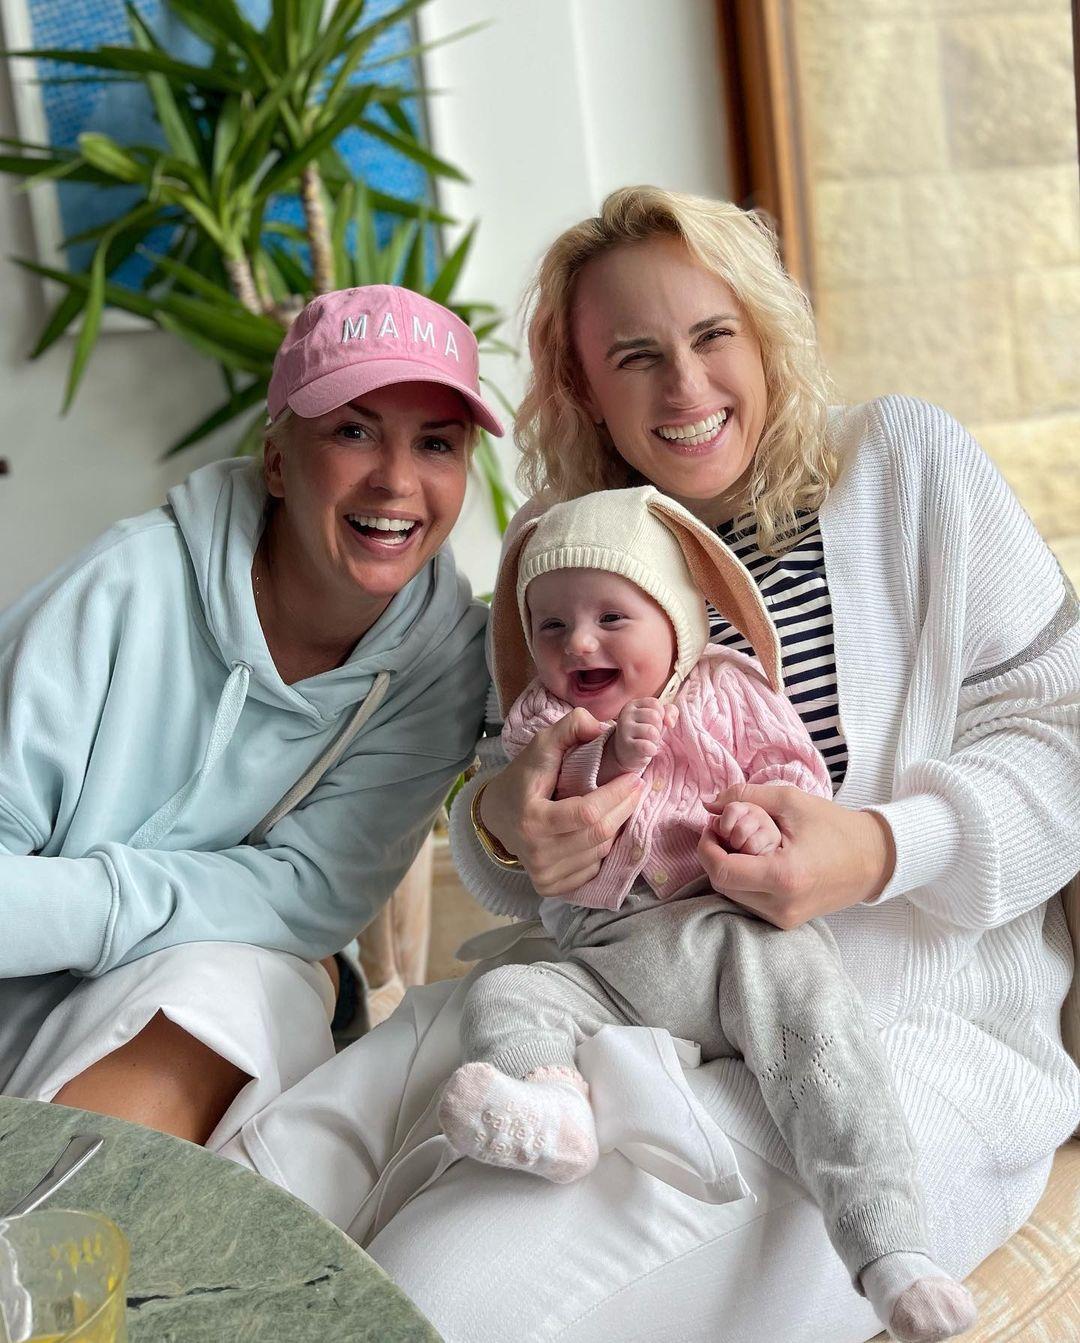 Rebel Wilson Gives Fans Close View Of Daughter's Face To Celebrate First Mother's Day